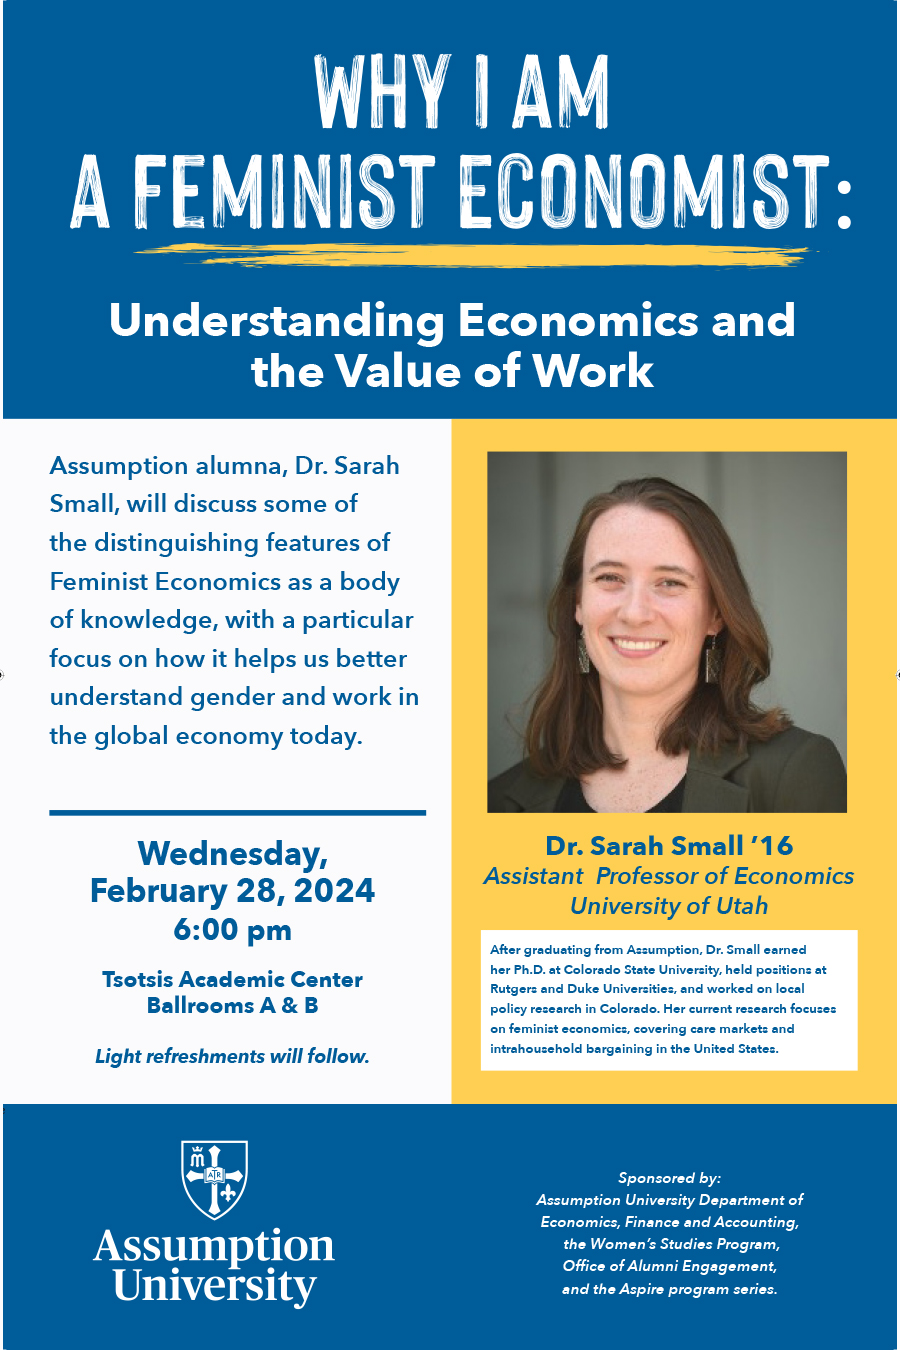 poster for Dr. Sarah Small's "Why I am a Feminist Economist"